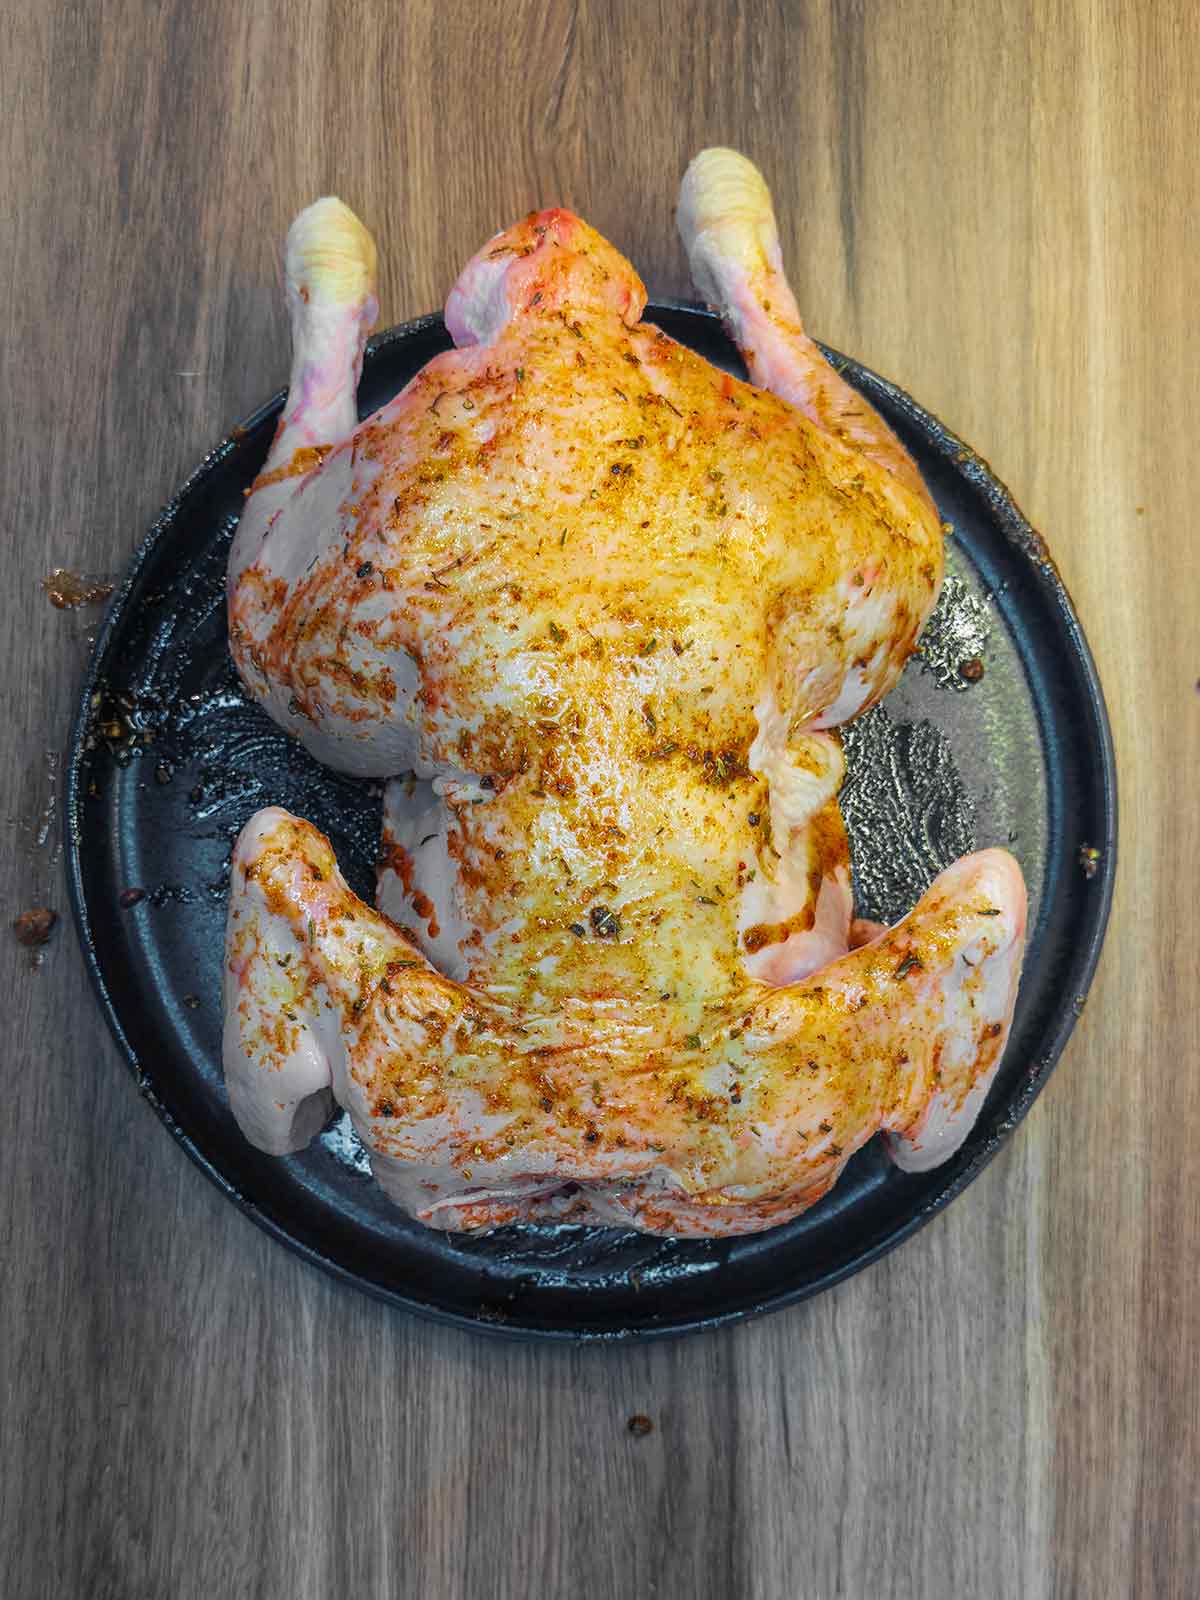 A whole chicken smothered in a spice rub.